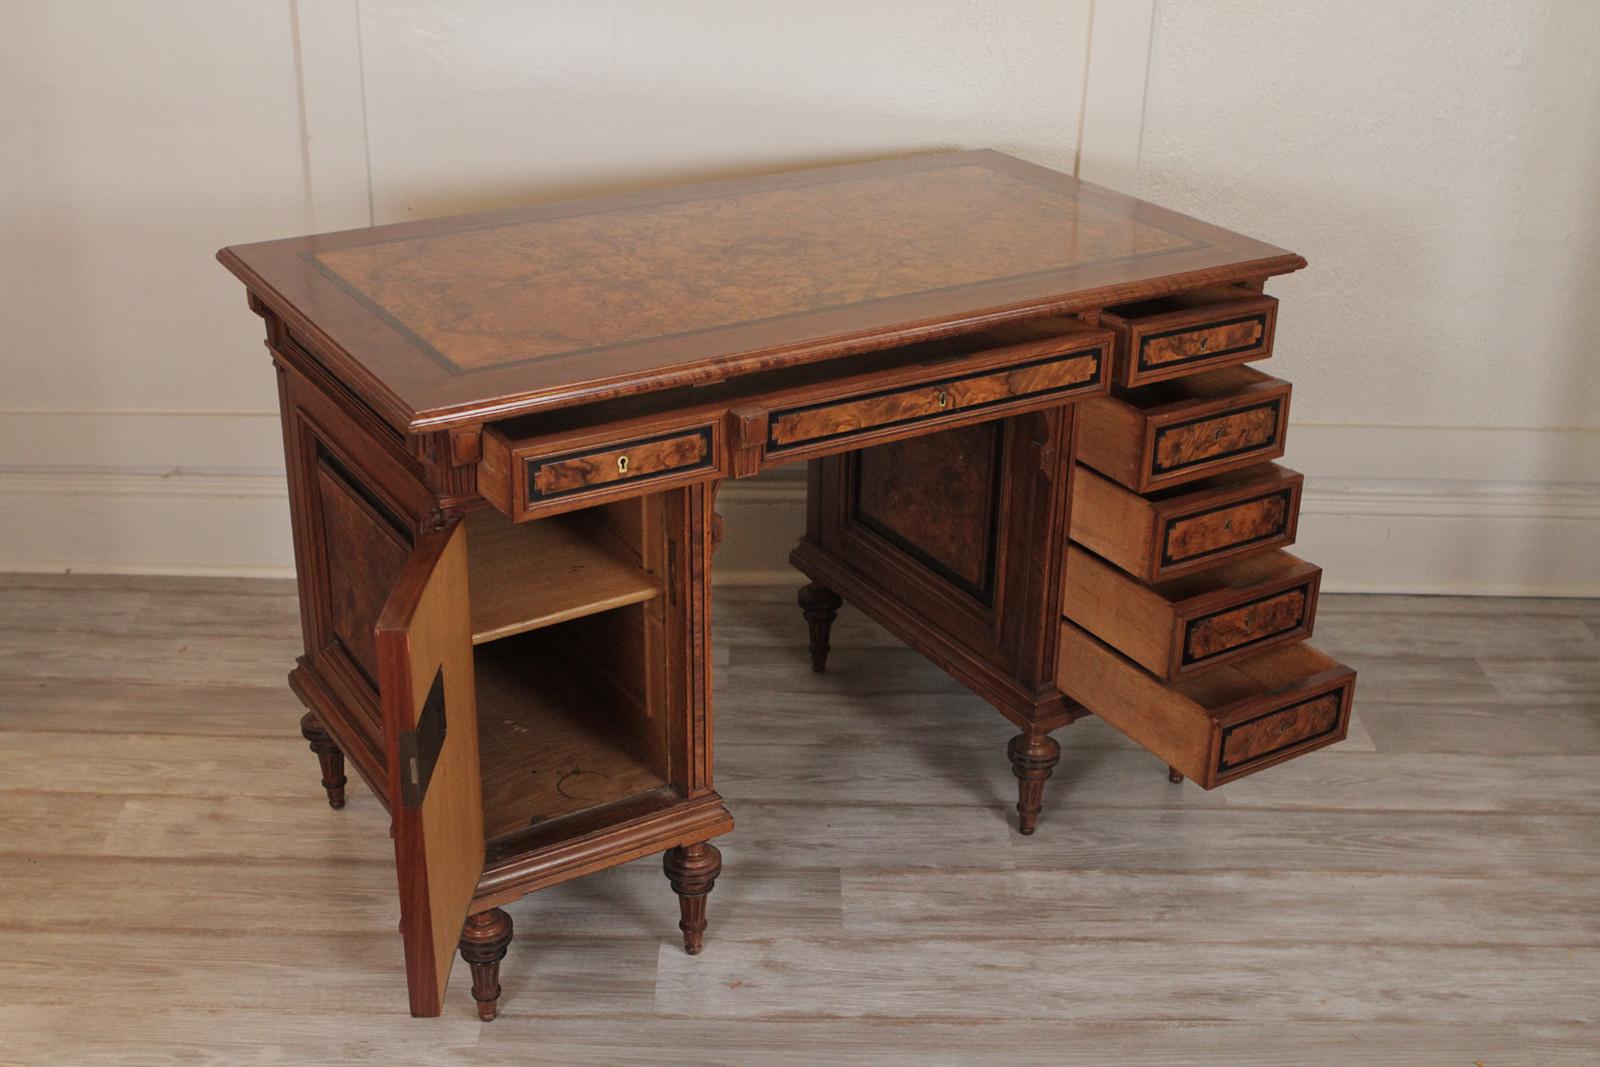 Burled walnut Renaissance revival desk. The highly figurative burled walnut top with ebonized accents on the top, drawers and feet.
Two upper drawers flanked by one set of drawers and a shelved compartment on the other. Diminutive size dimensions: